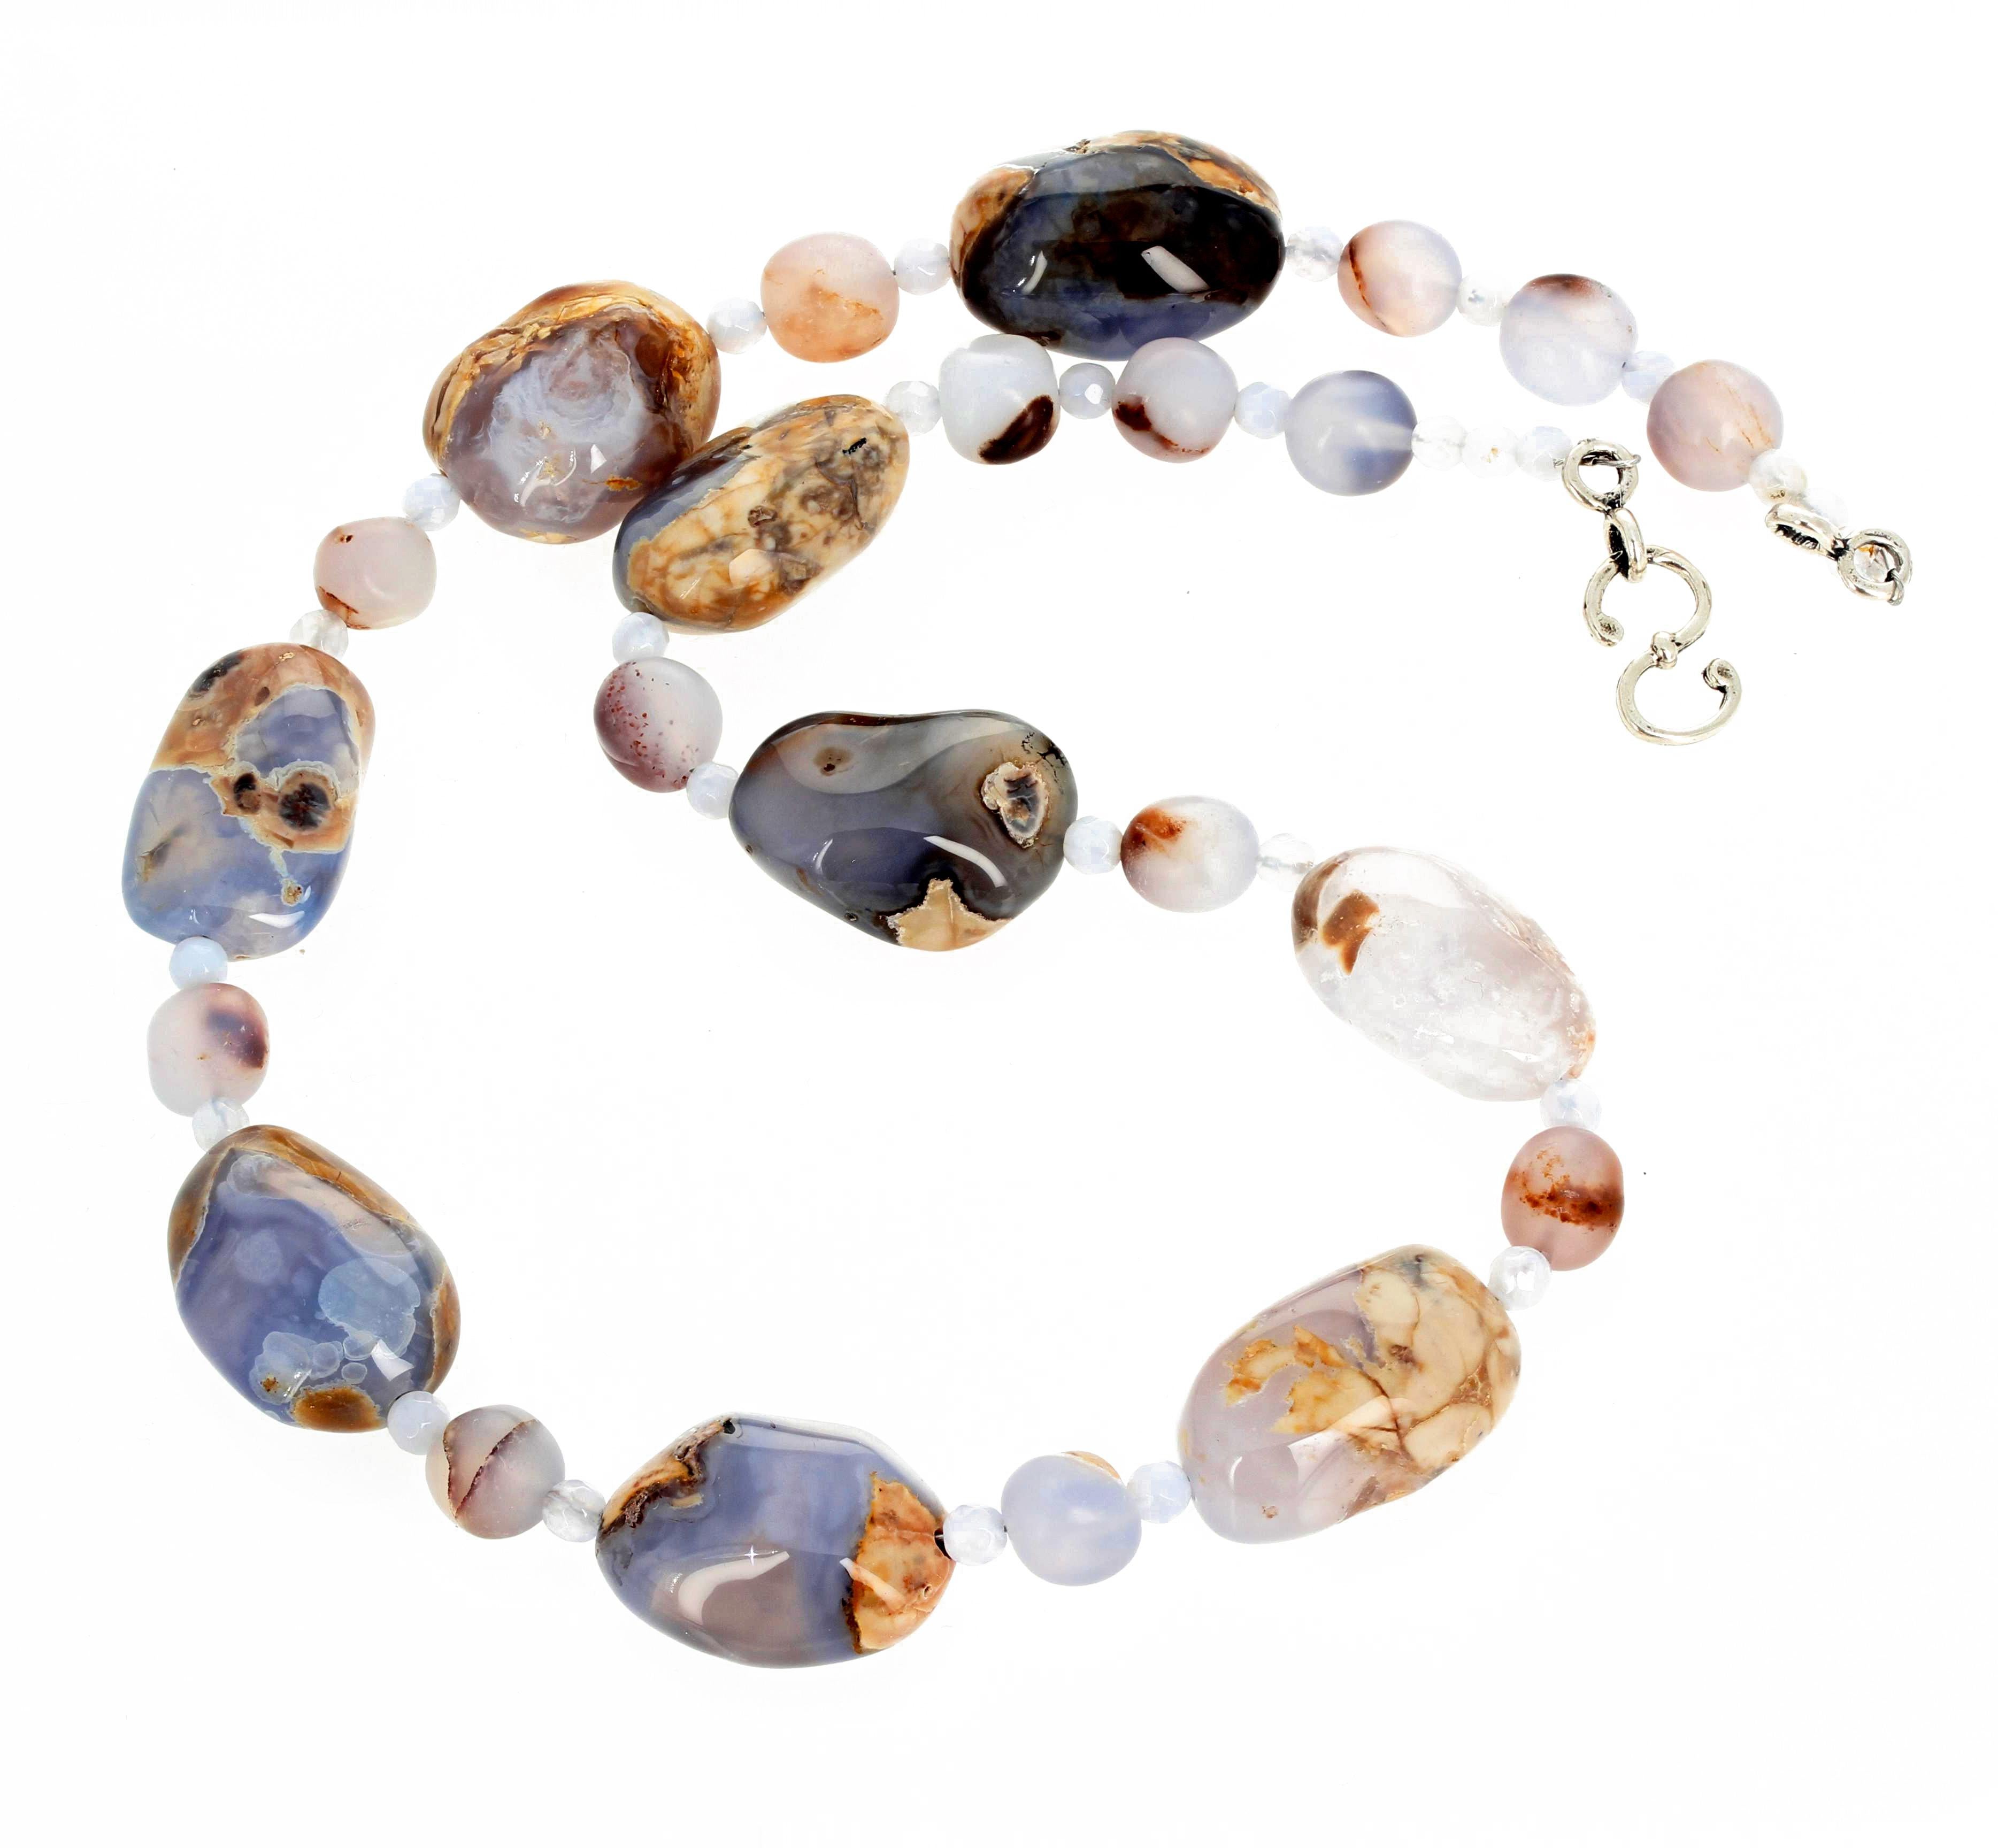 Chalcedony, Chalcedony and Chalcedony Necklace